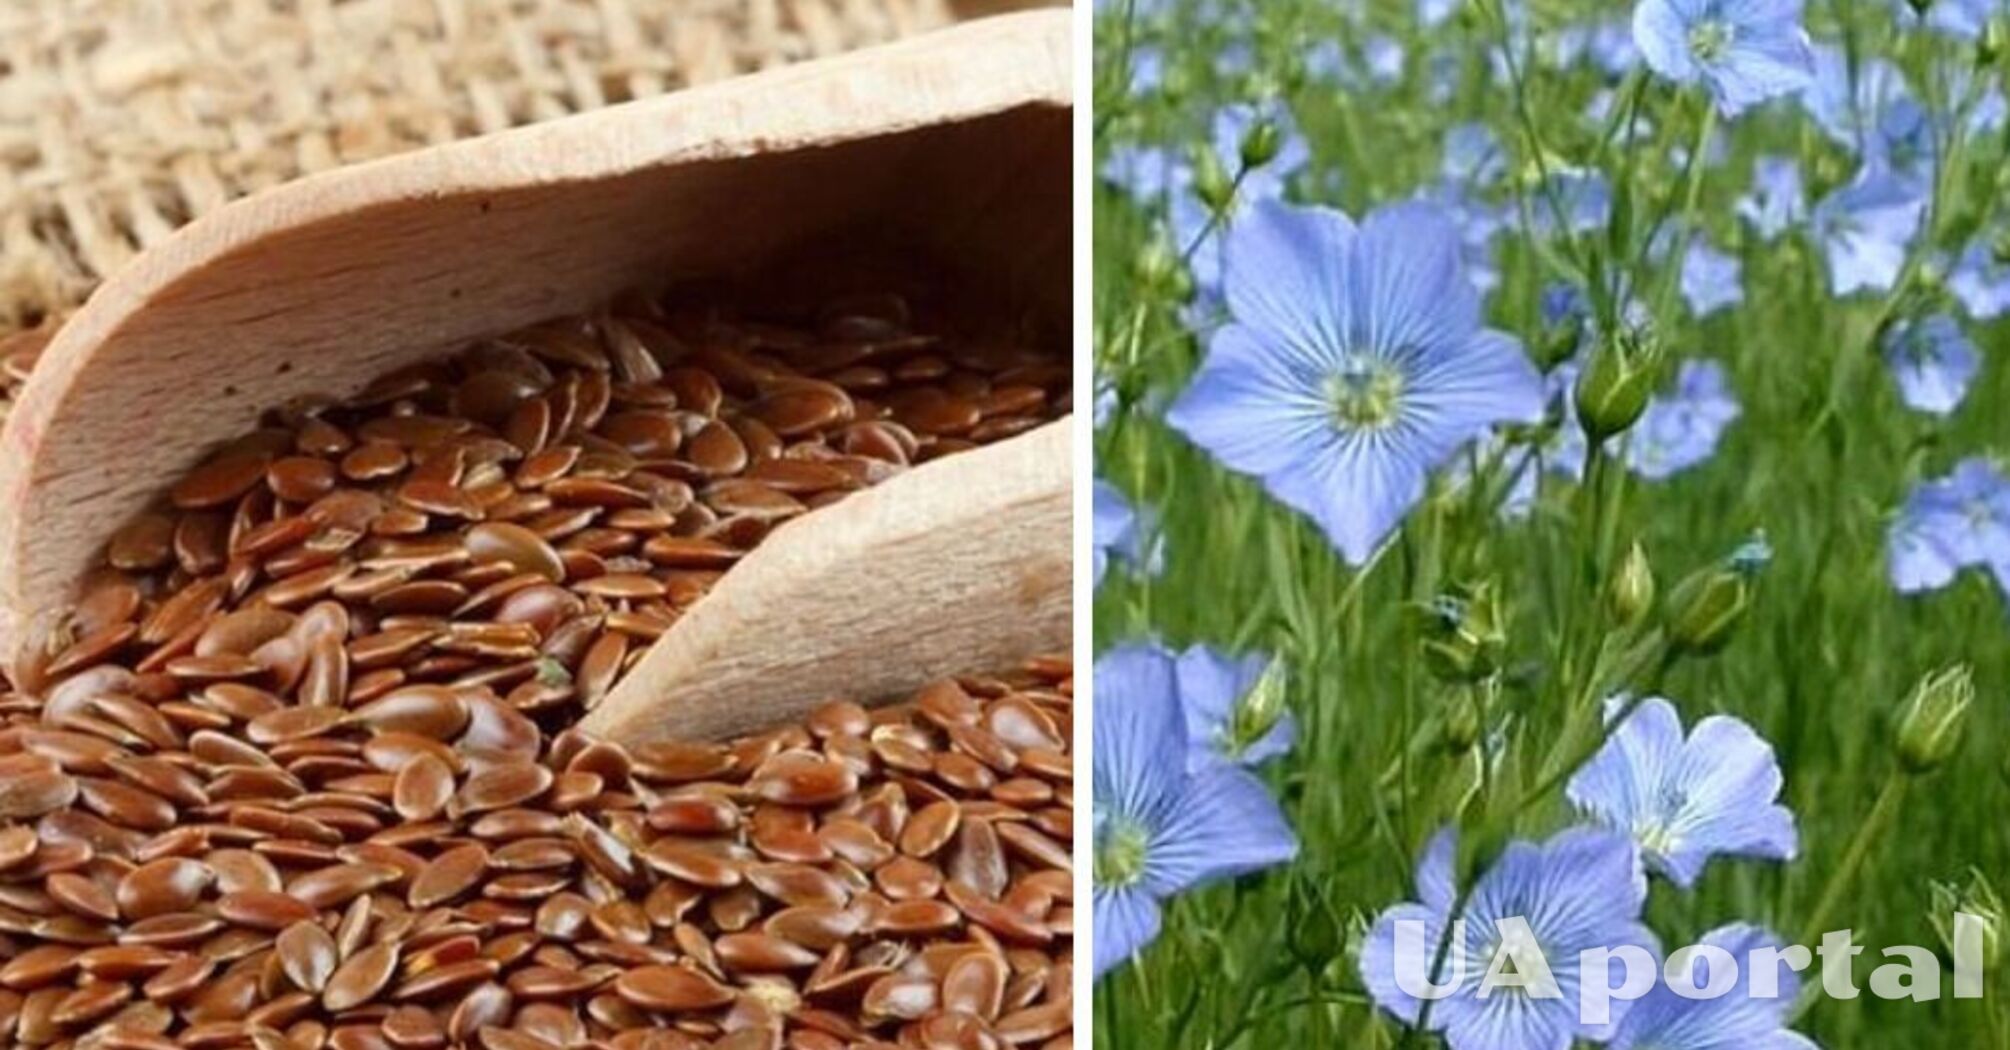 Consuming flaxseed is strictly prohibited for some individuals